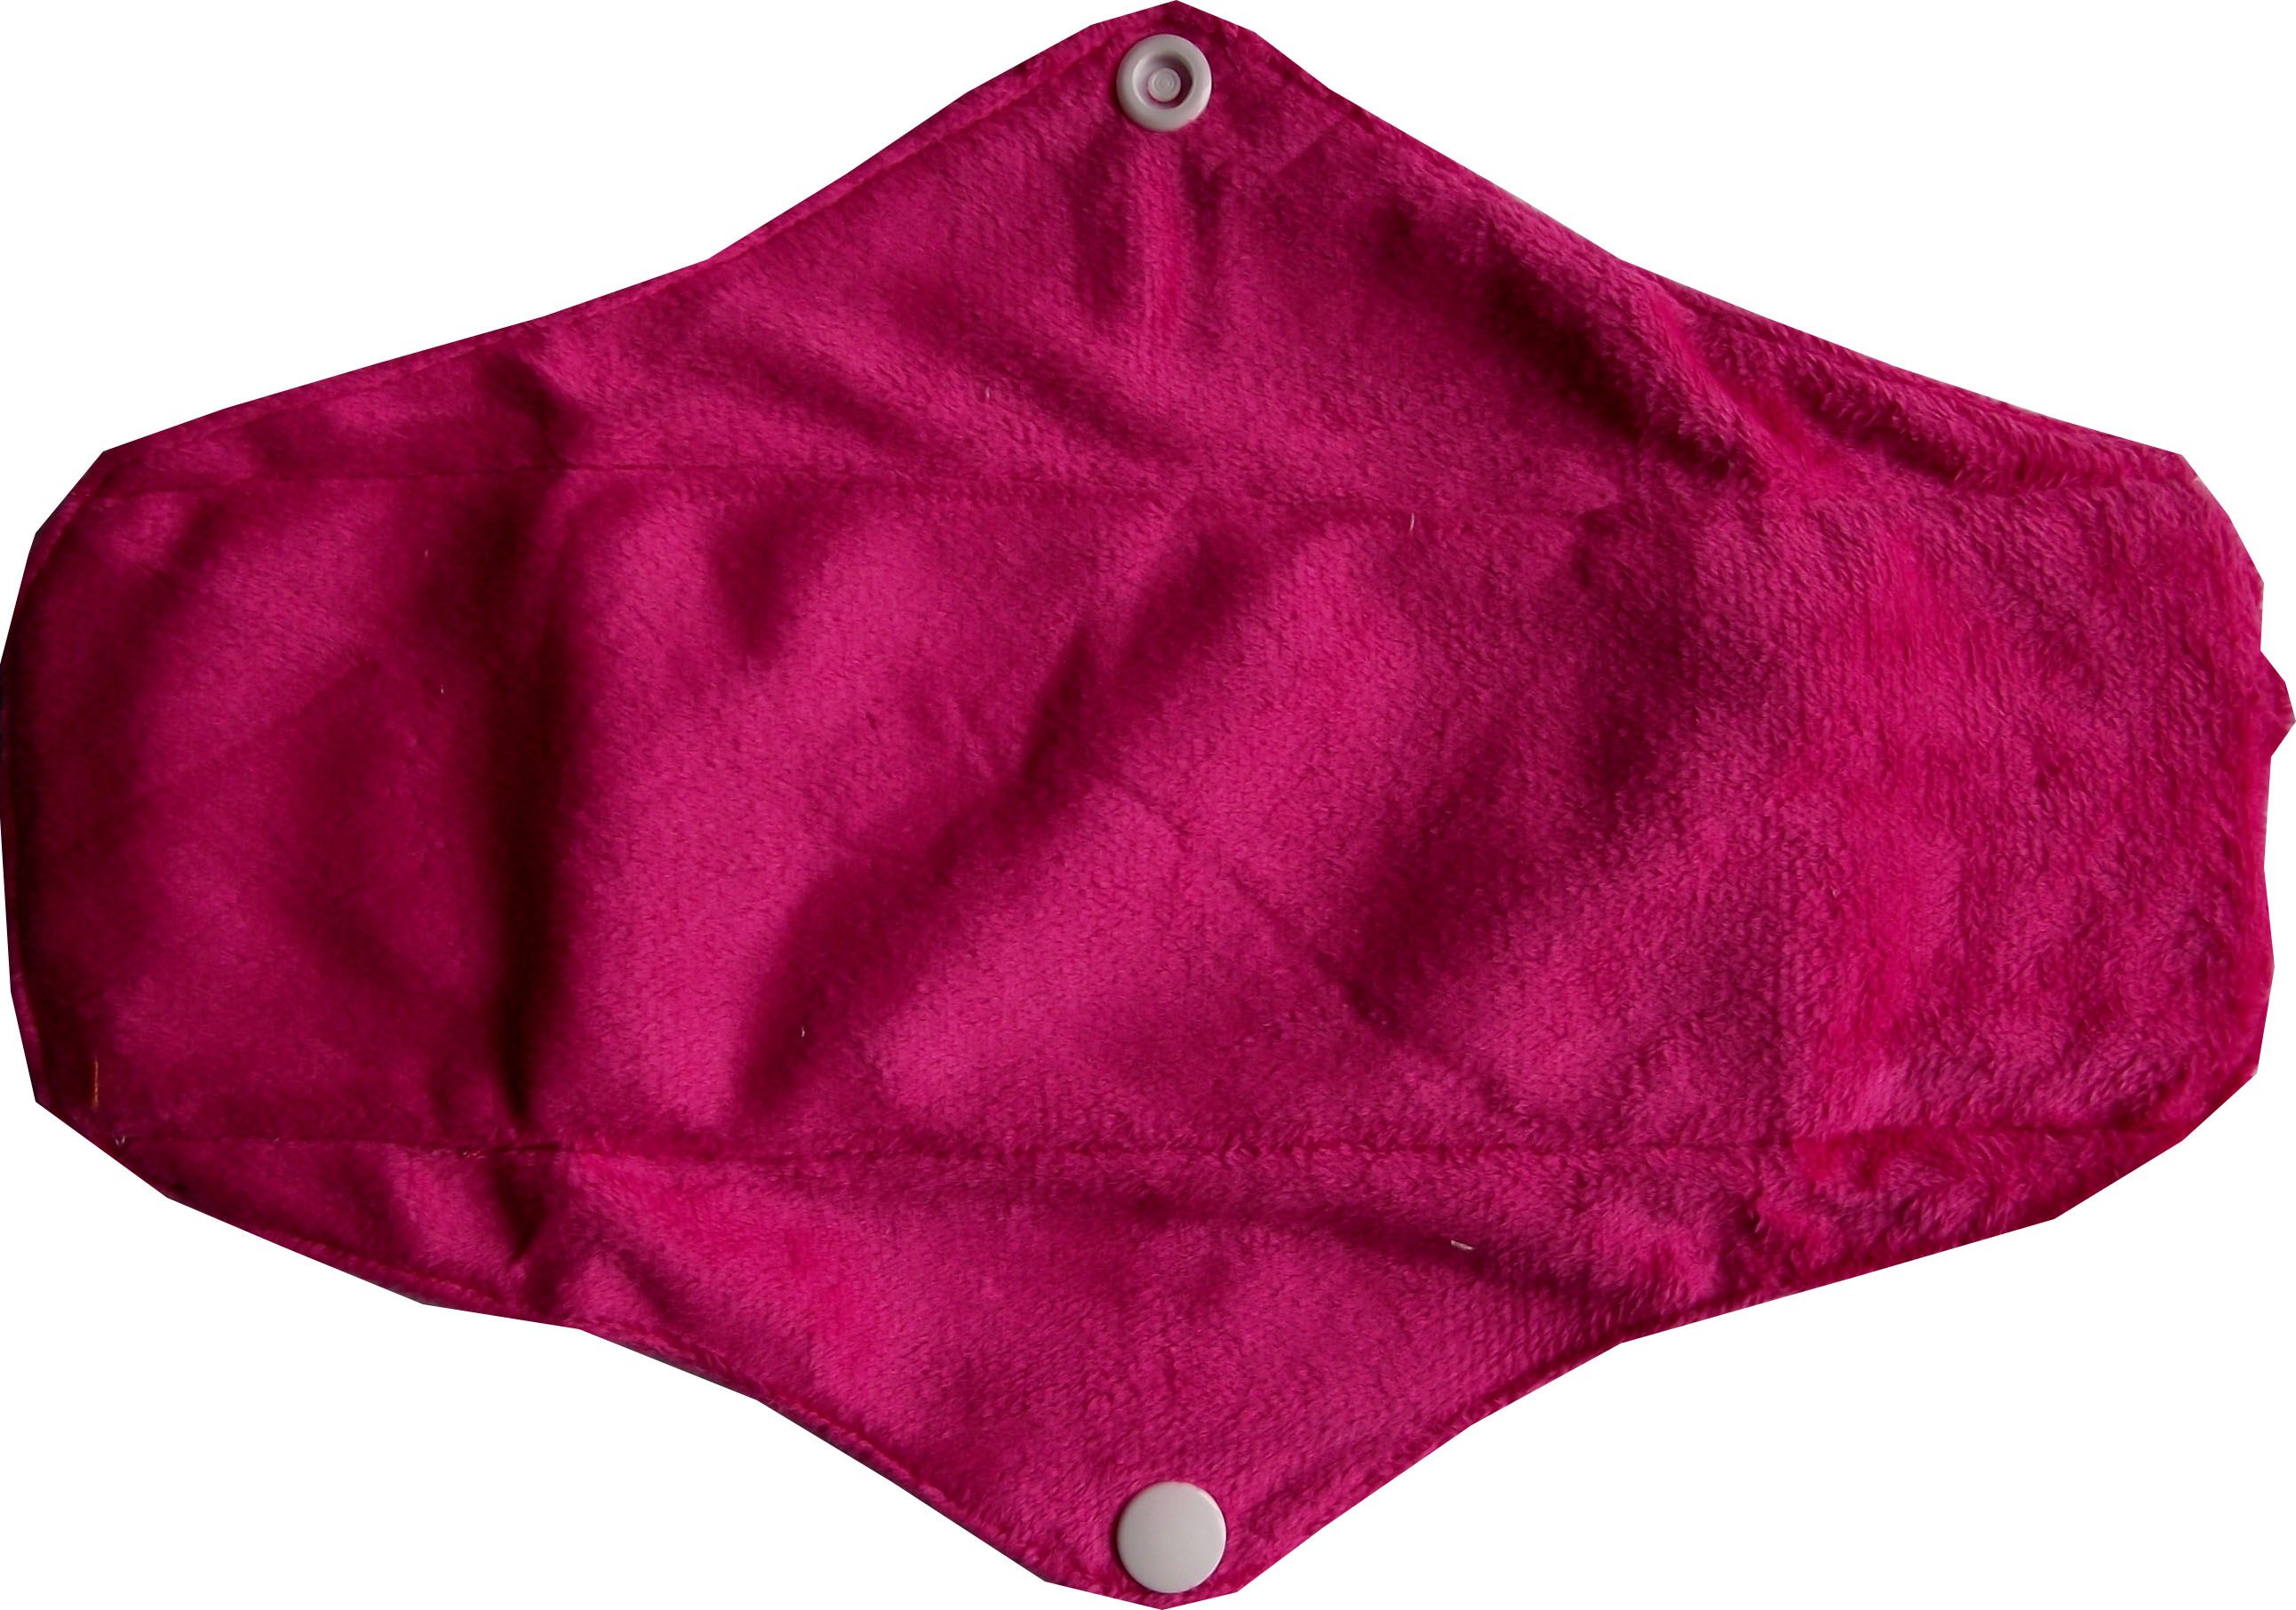 What are reusable menstrual pads?